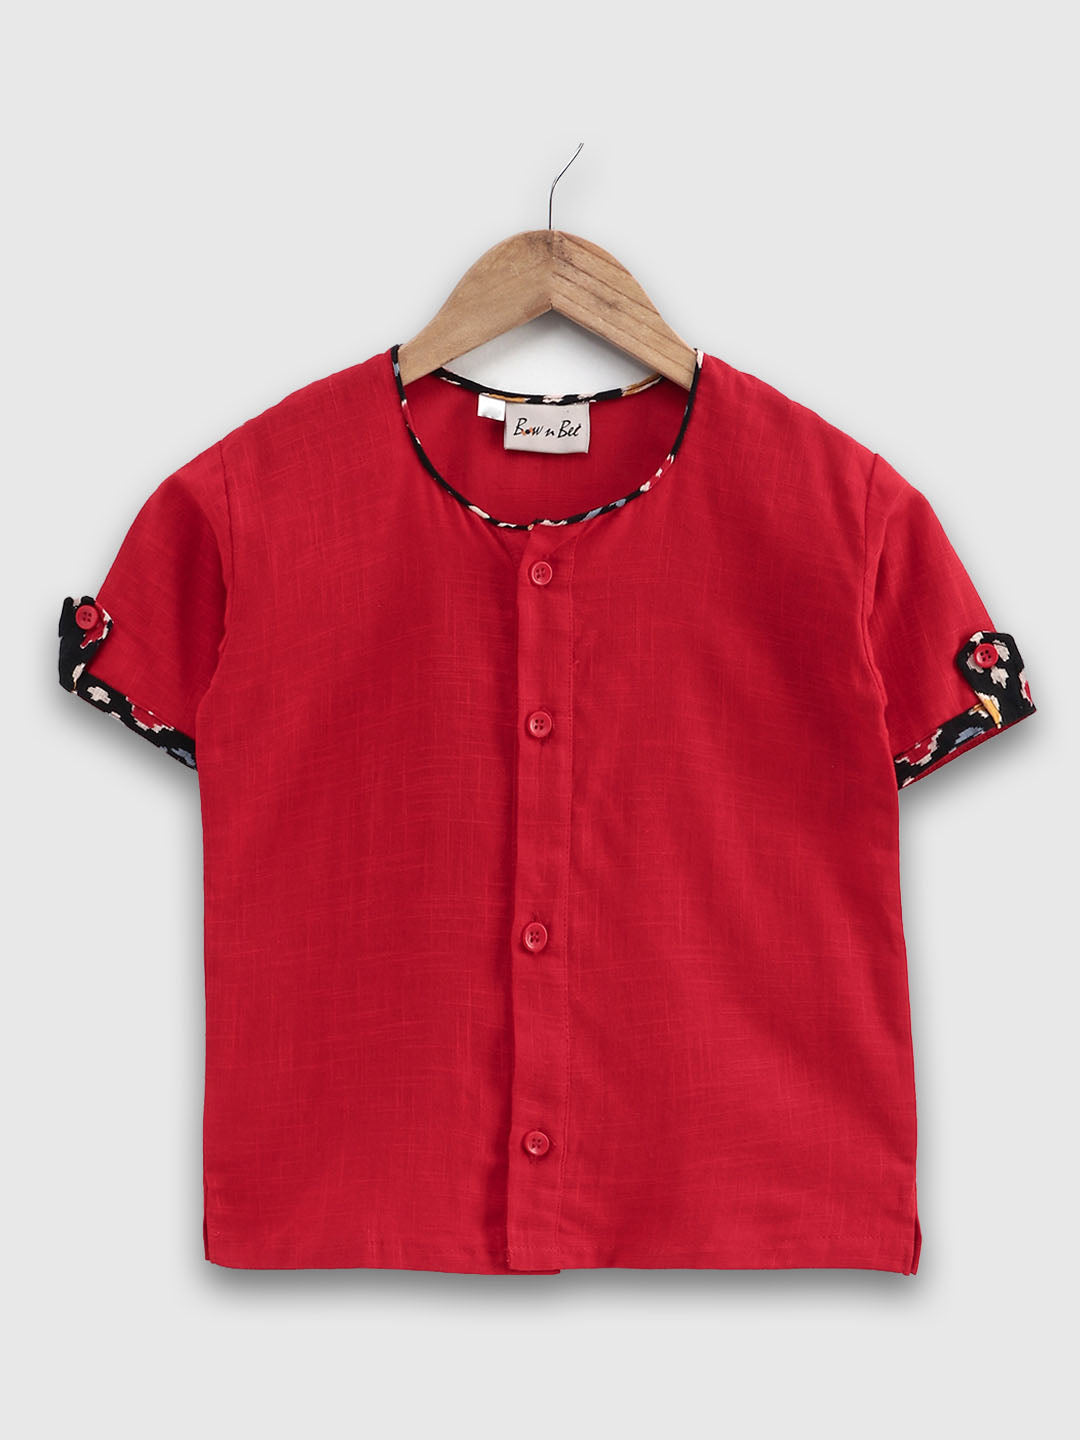 BownBee Cotton Half Sleeve Shirt For Baby Boys- Red